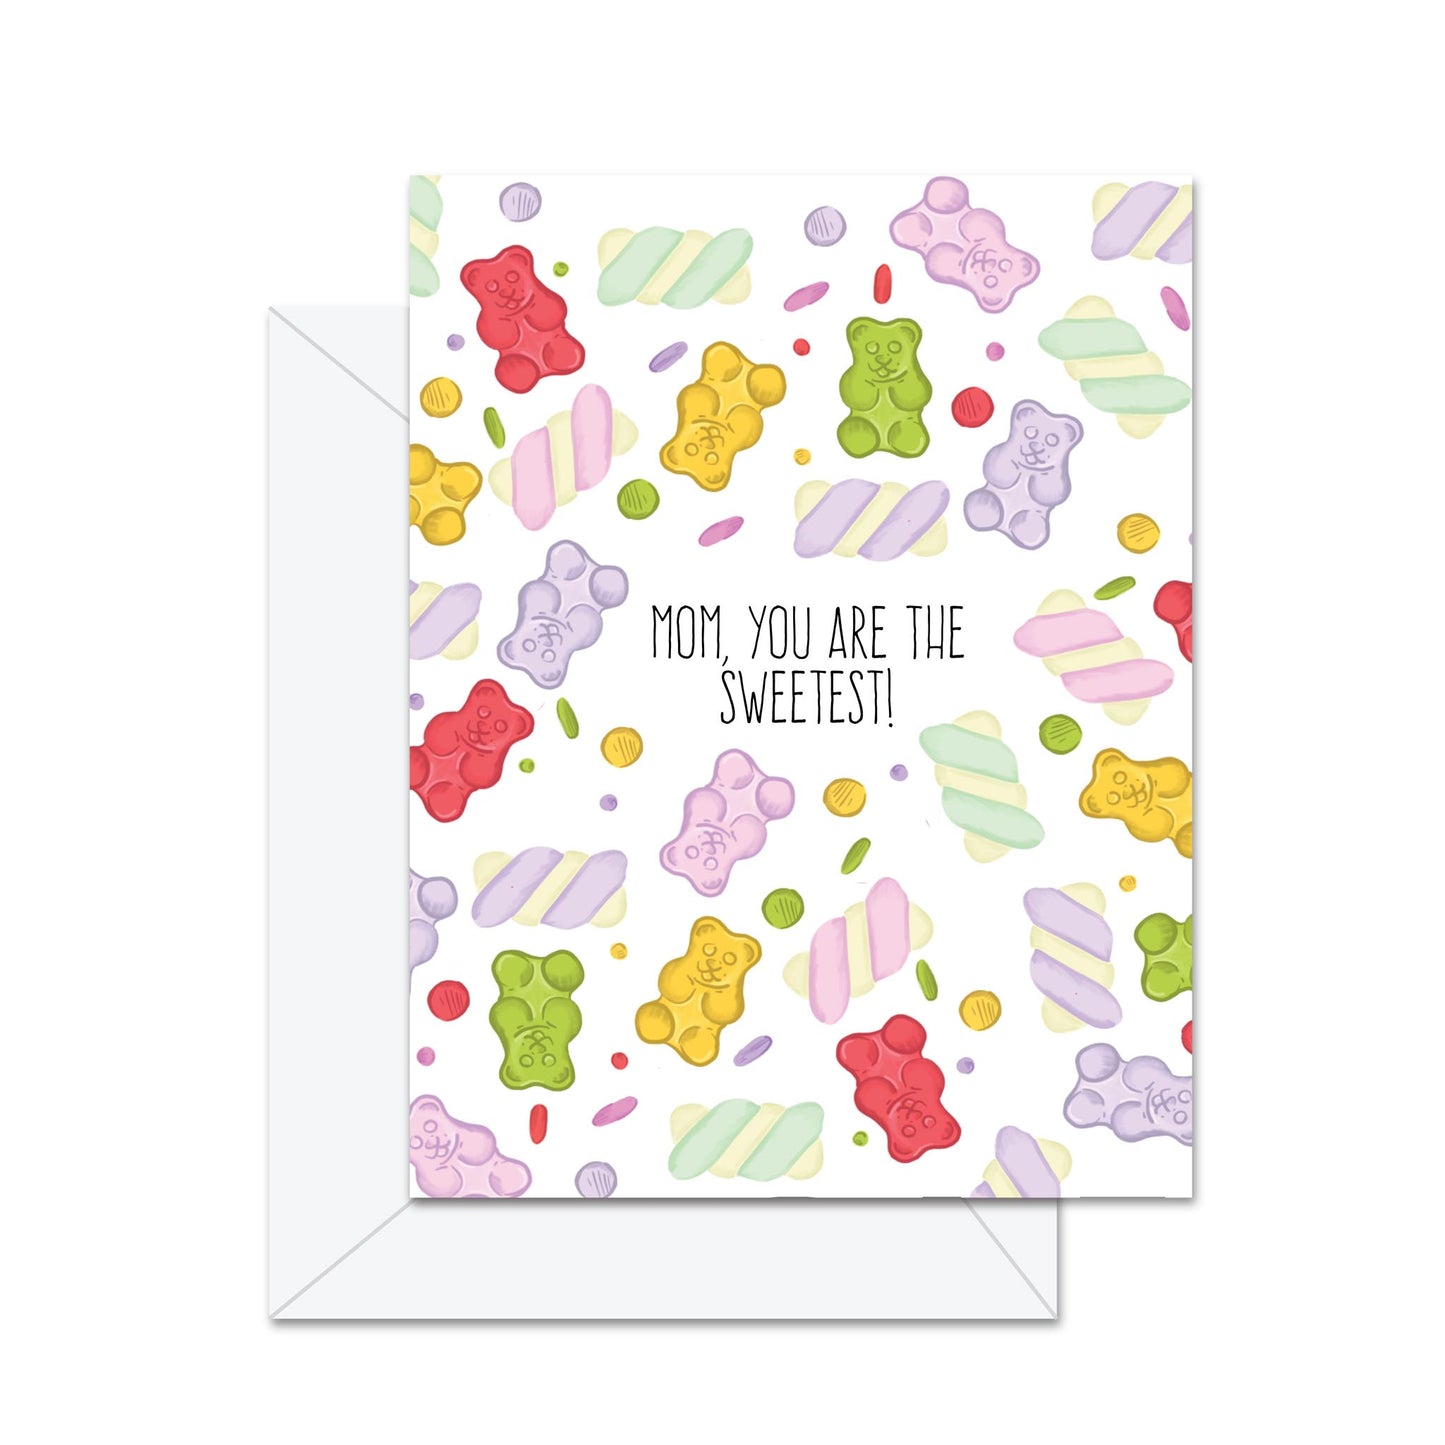 Mom, You Are The Sweetest! - Greeting Card